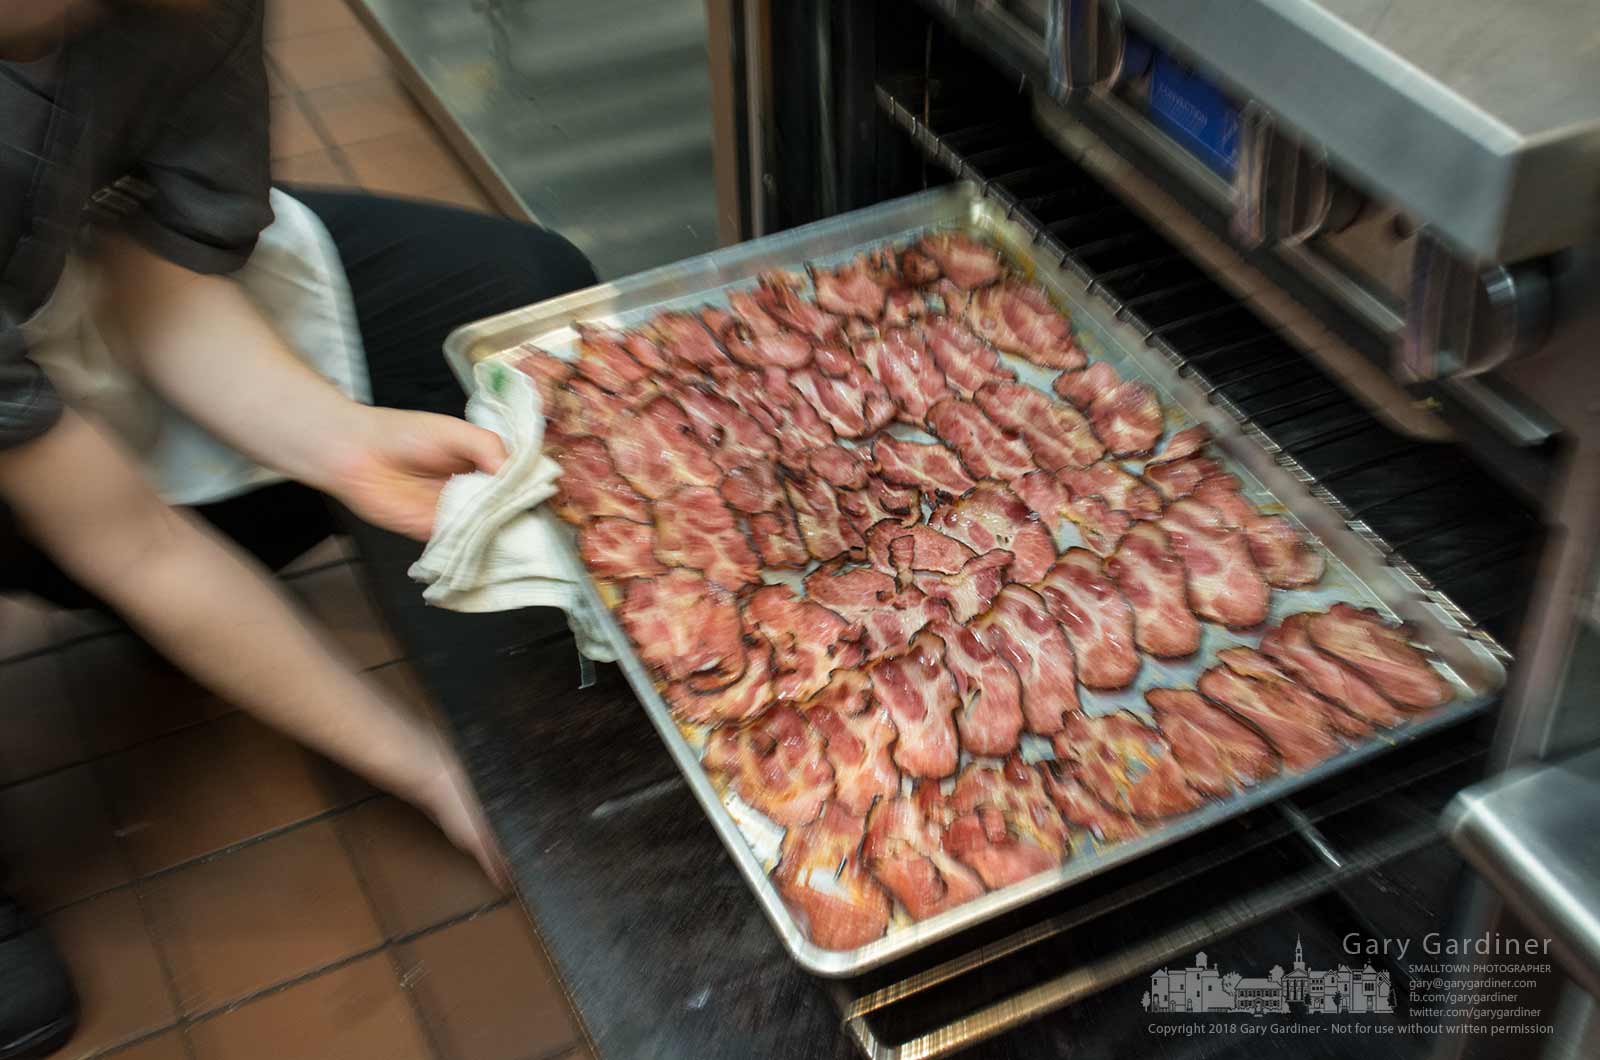 A cook removes a tray of pecan smoke pork shoulder bacon from an oven at Barrell & Boar in Uptown Westerville as the restaurant prepares for its opening. My Final Photo for Jan. 18, 2018.